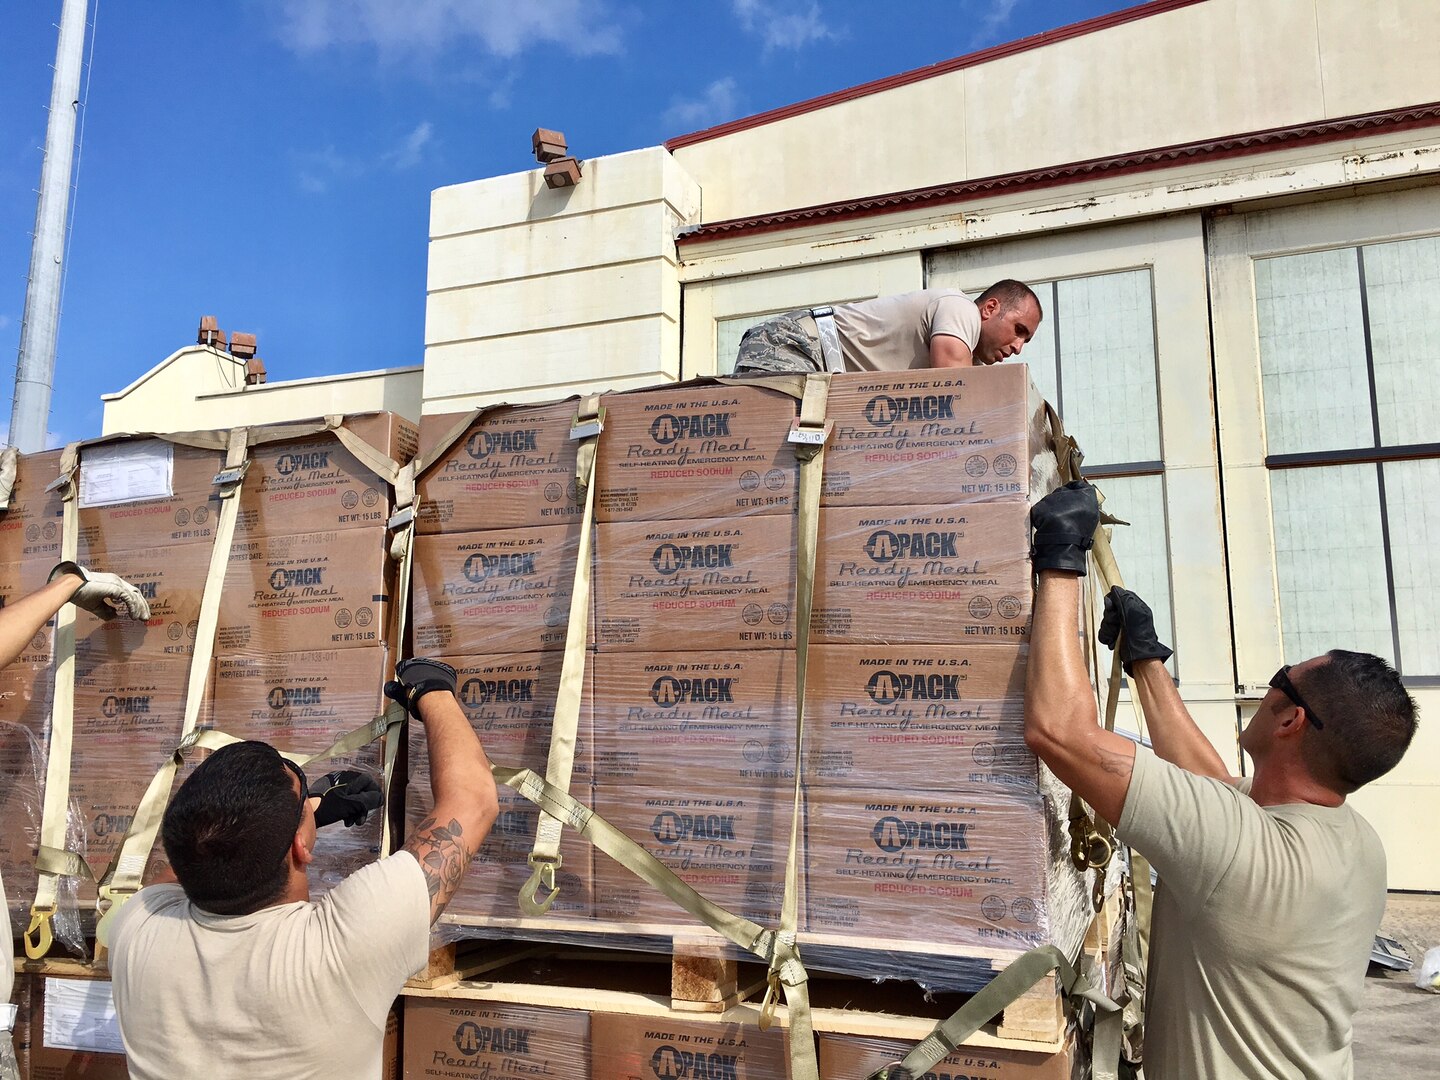 Airman from the 502nd Logistics Readiness Squadron and 26th Aerial Port Squadron finalize relief supply pallets for air transport Sept. 22, 2017 at Joint Base San Antonio-Kelly Field.  The supplies were being staged at the Federal Emergency Management Agency’s Incident Support Base at Kelly for transport to areas devastated by Hurricane Maria (U.S. Air Force image/Dan Hawkins)